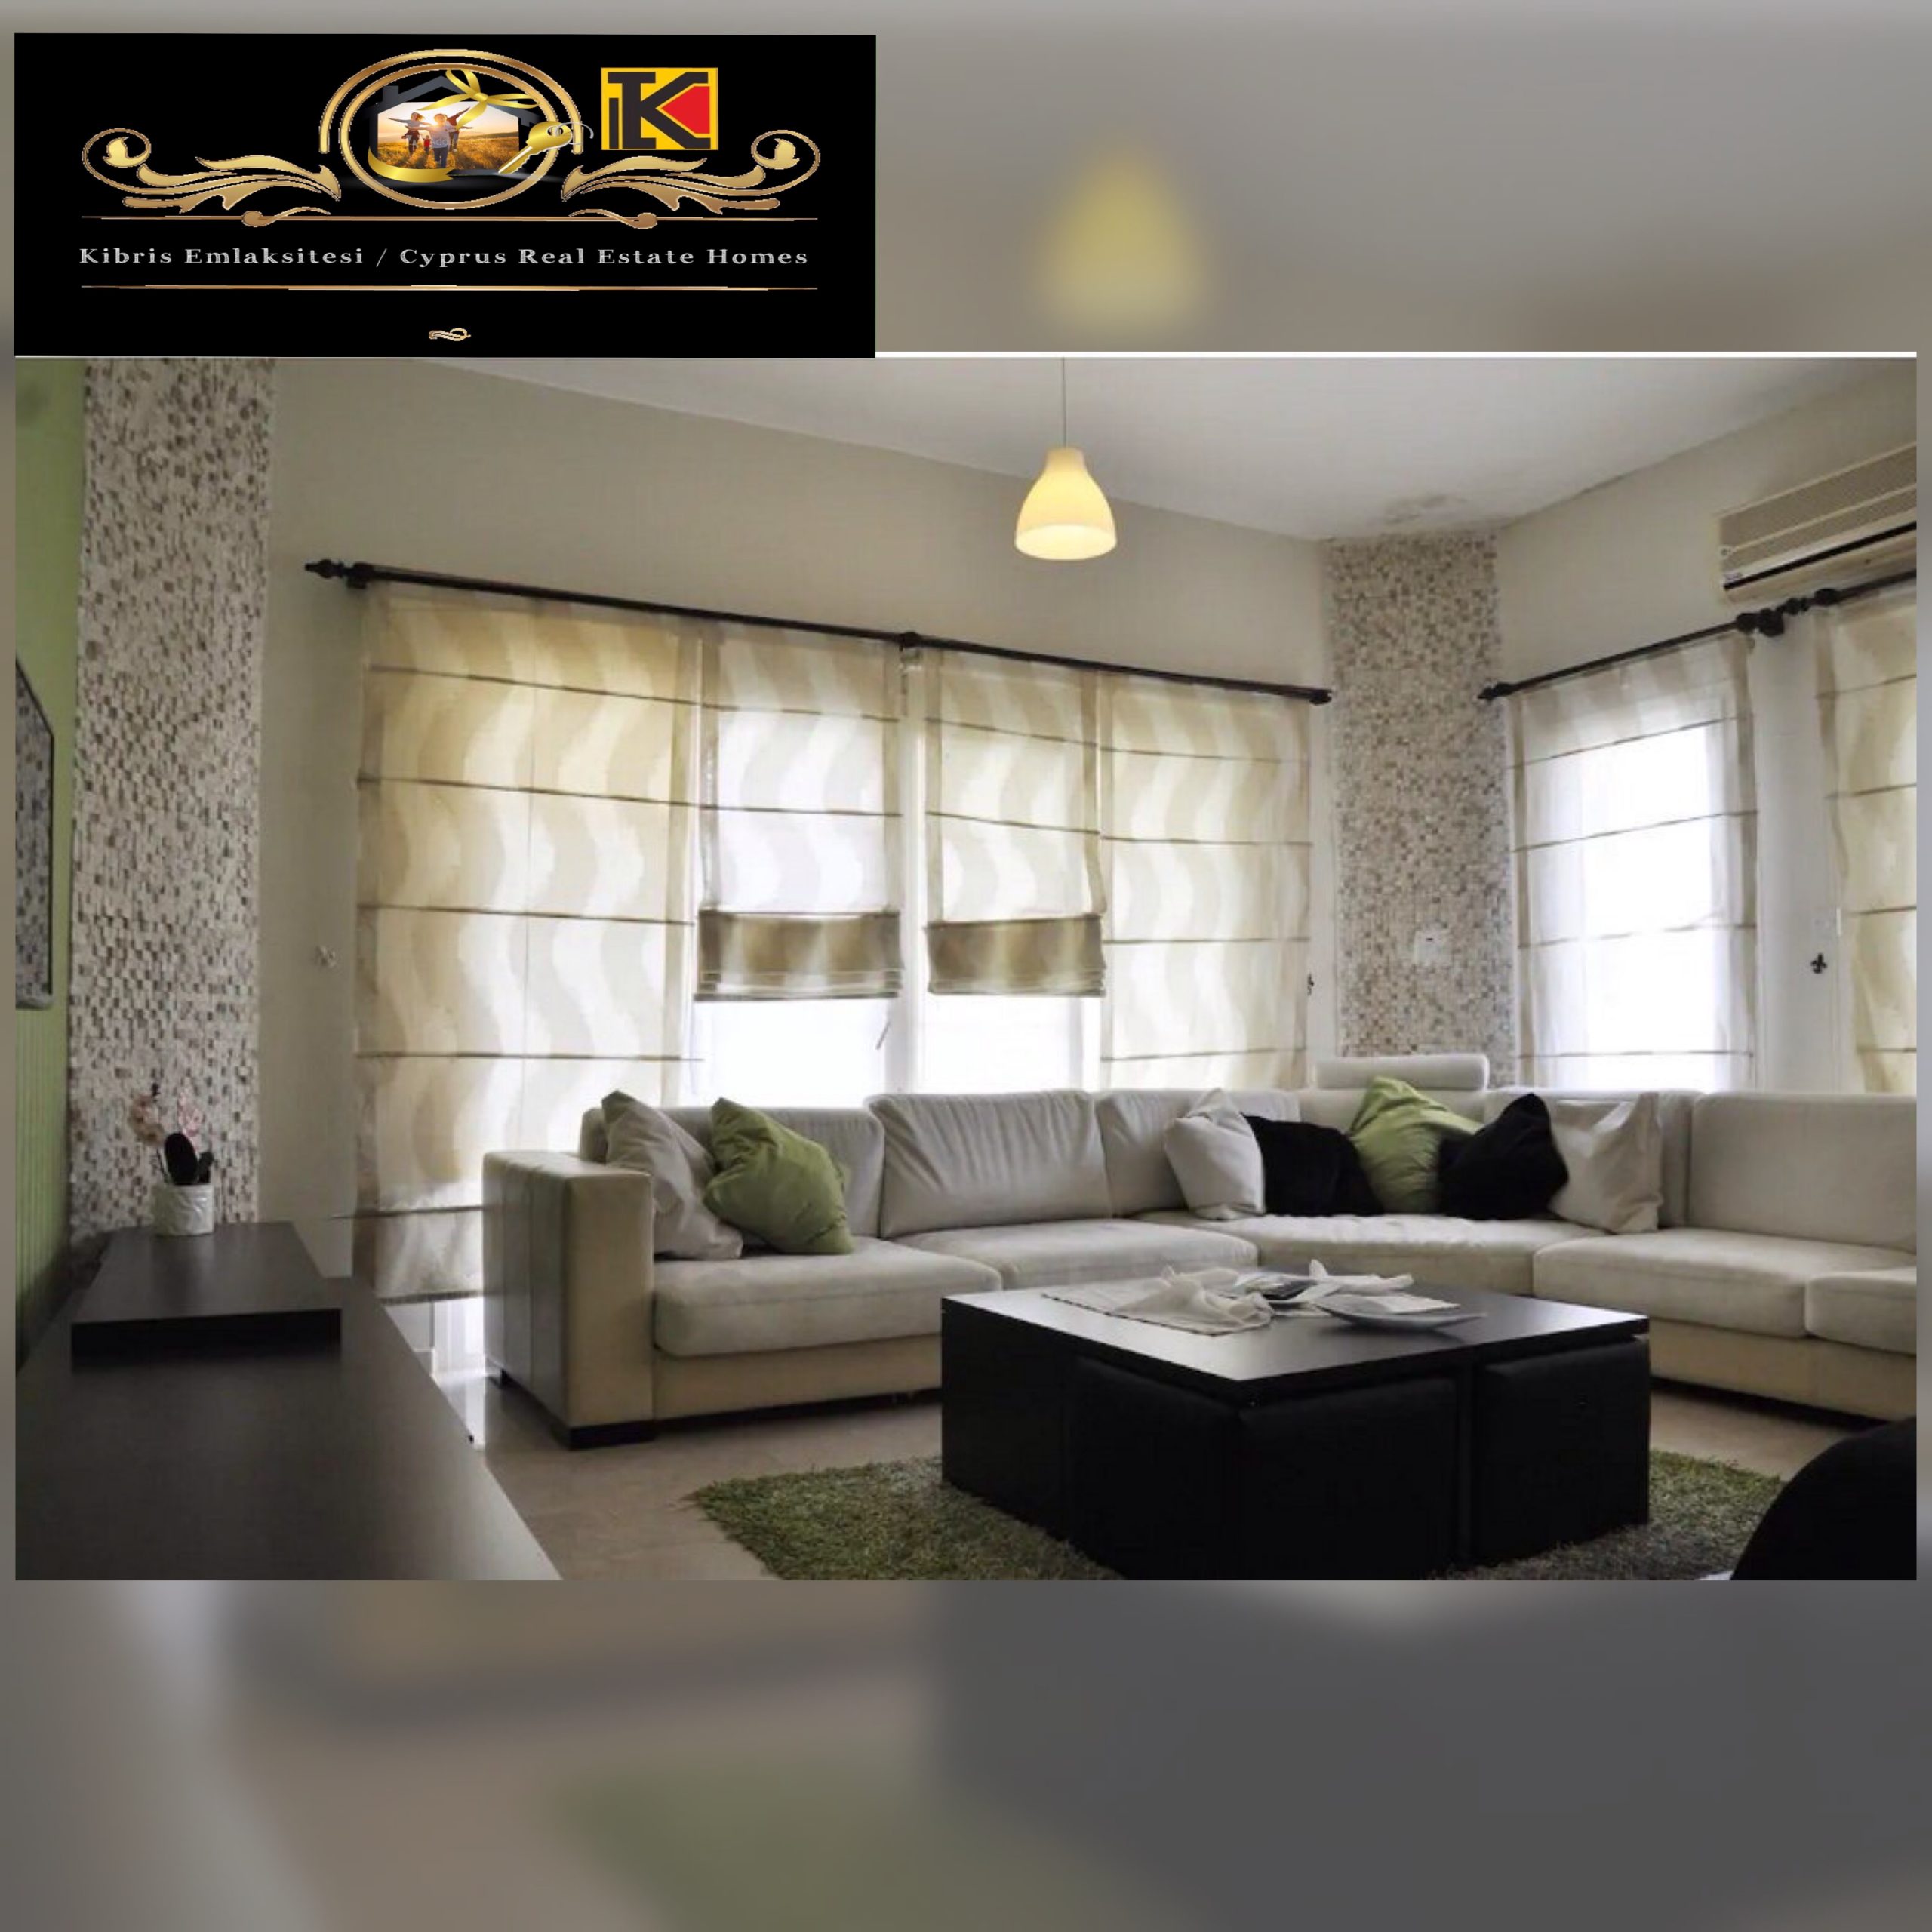 3 Bedroom Apartment For Rent Location Behind Gloria Jeans Cafe Girne